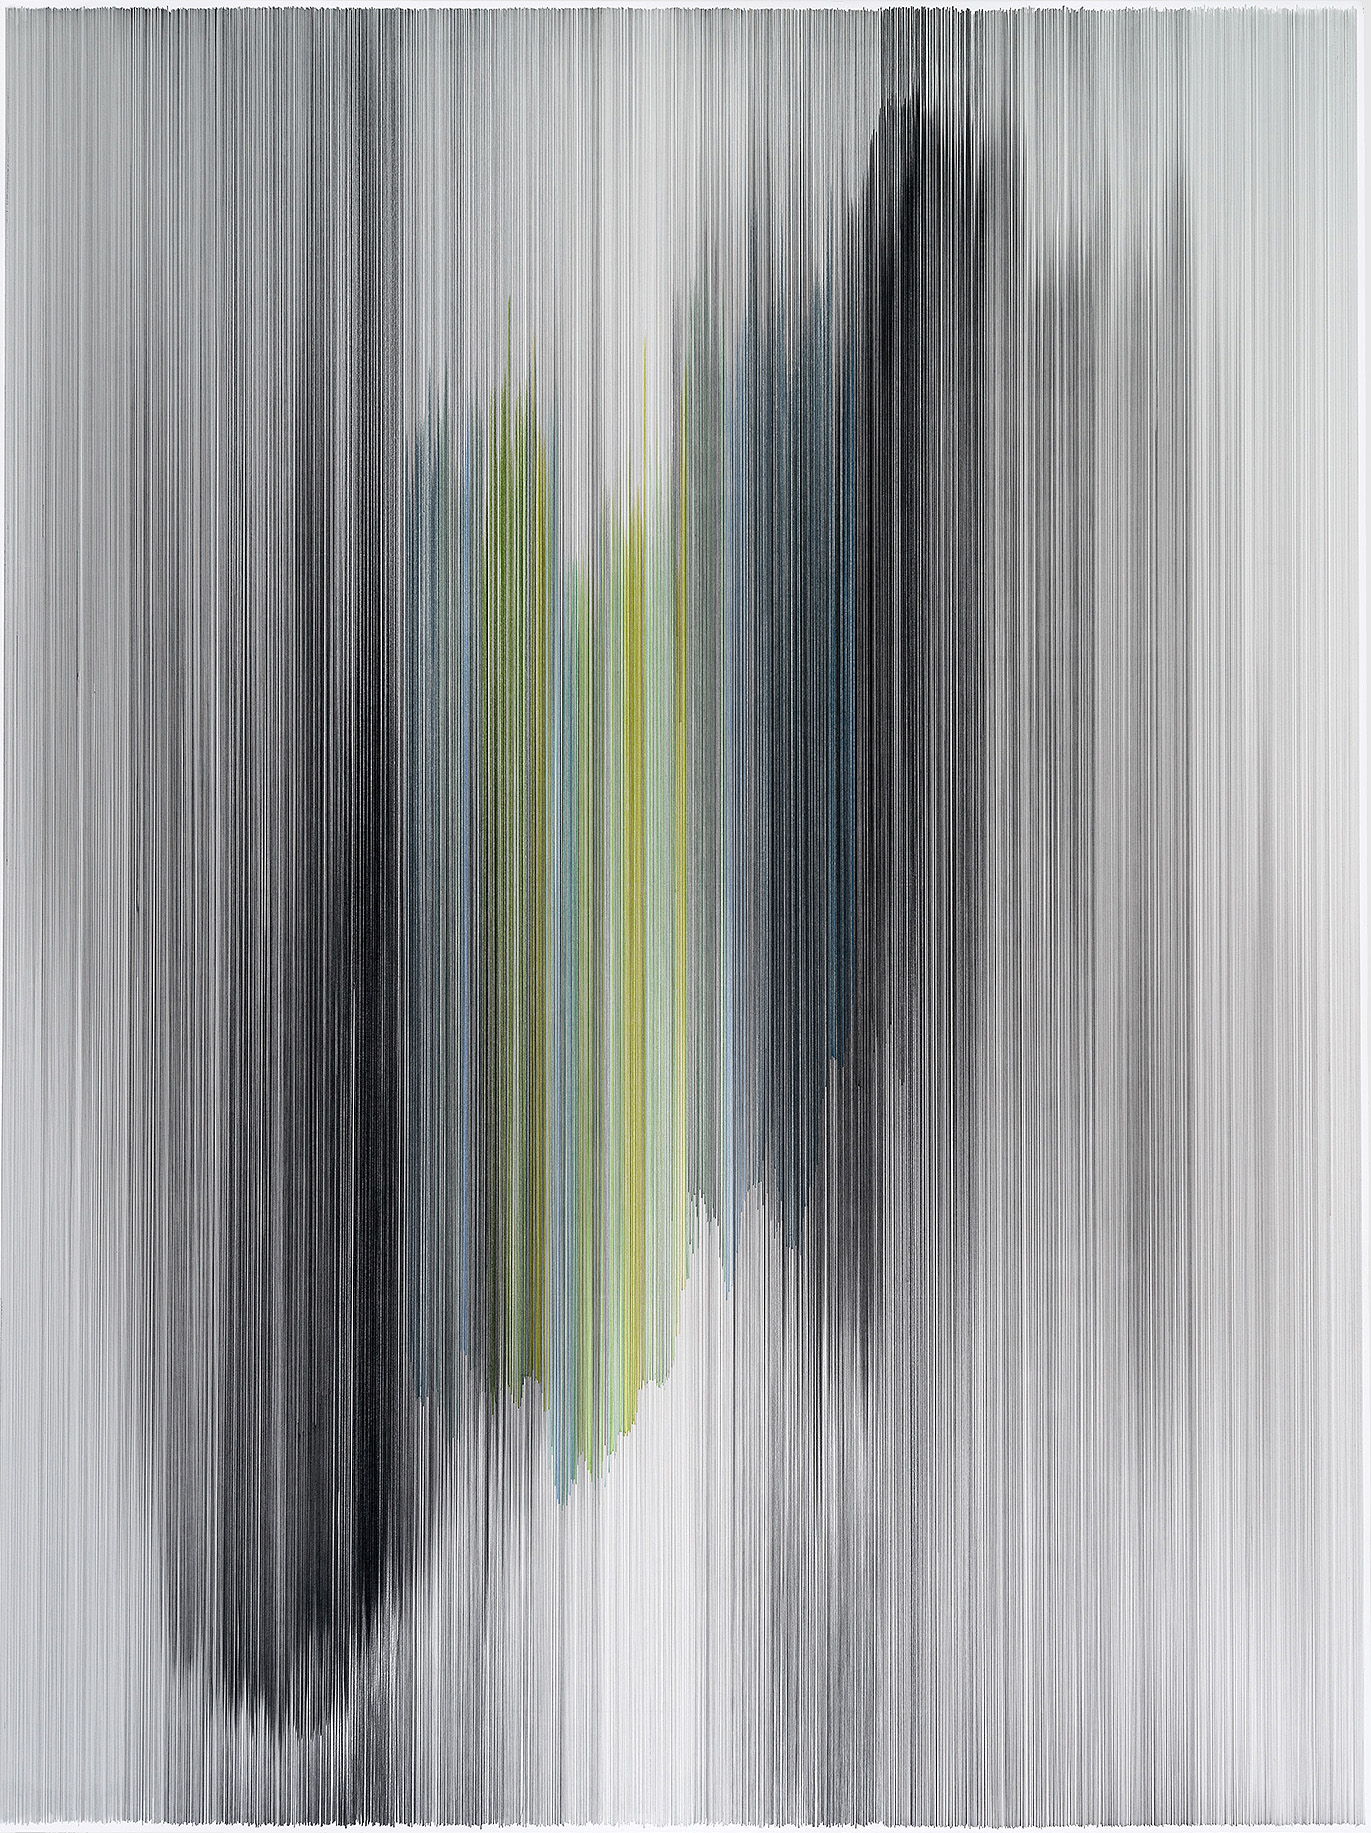    parallel 44   2014 graphite and colored pencil on mat board 80 x 60 inches 